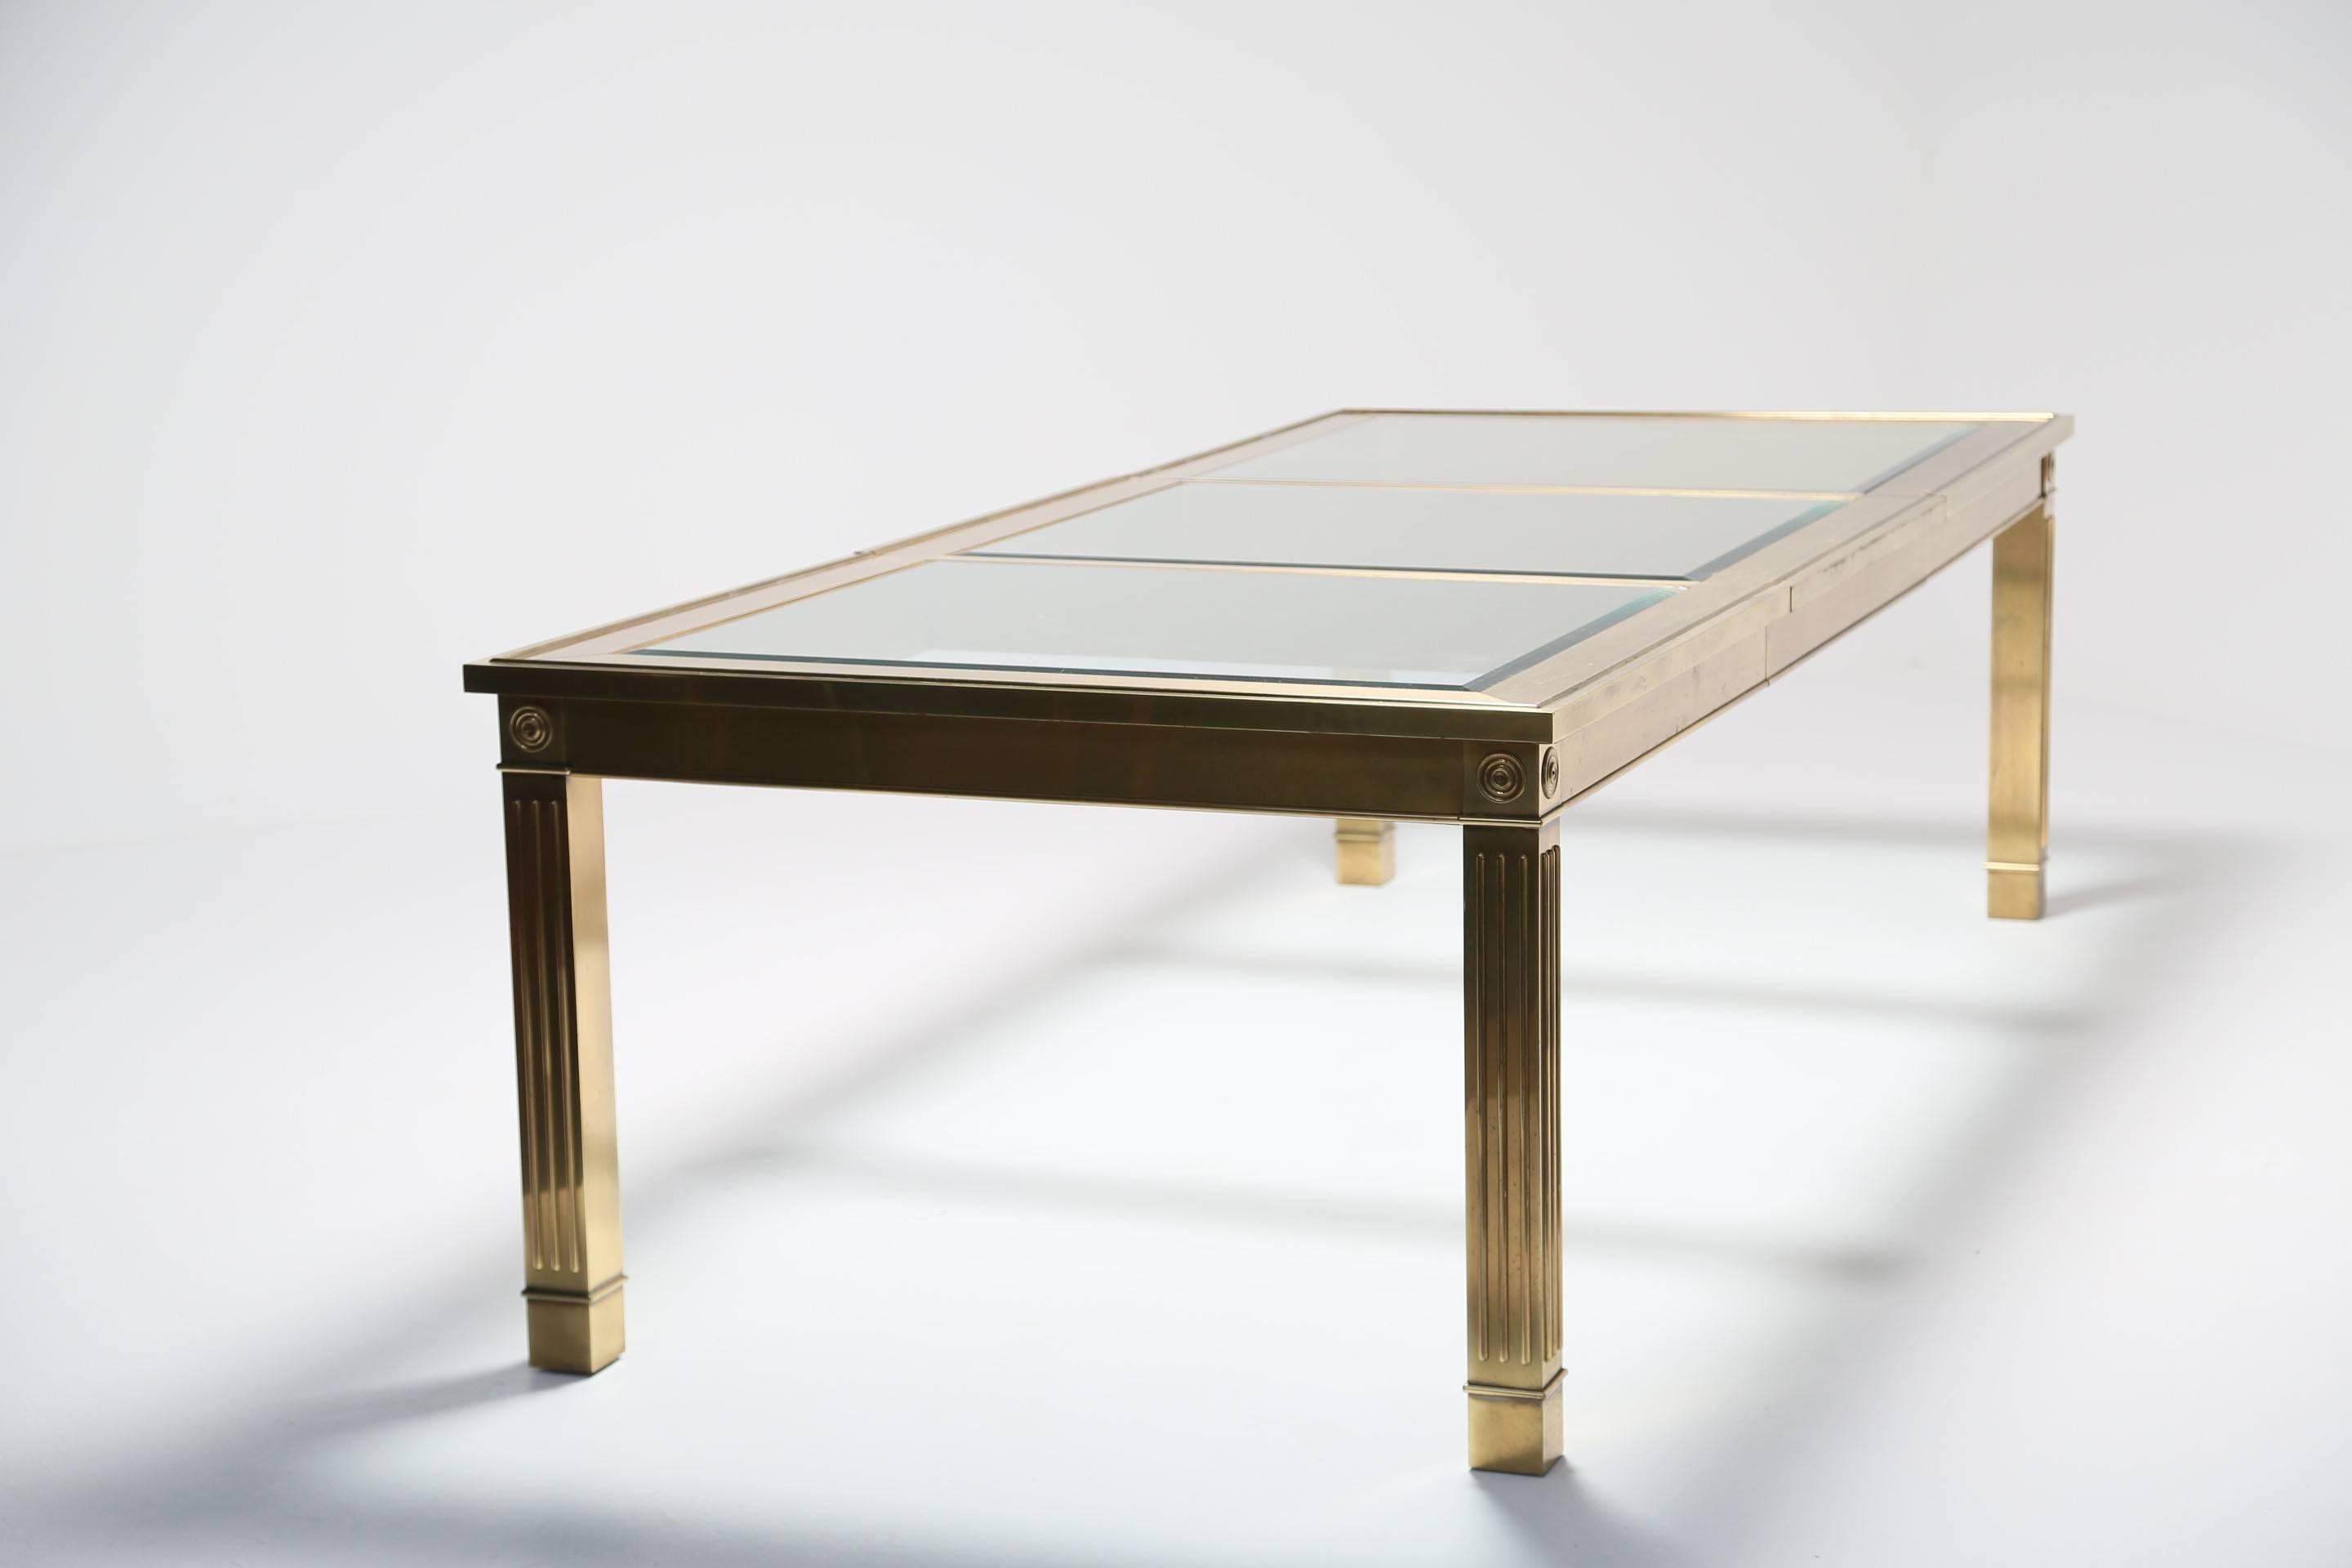 An extending brass and glass dining table by Mastercraft with one large spare leaf. A really beautiful and large dining table with beveled glass top. The table is plated brass and there are a few areas where the brass has been rubbed. Chairs